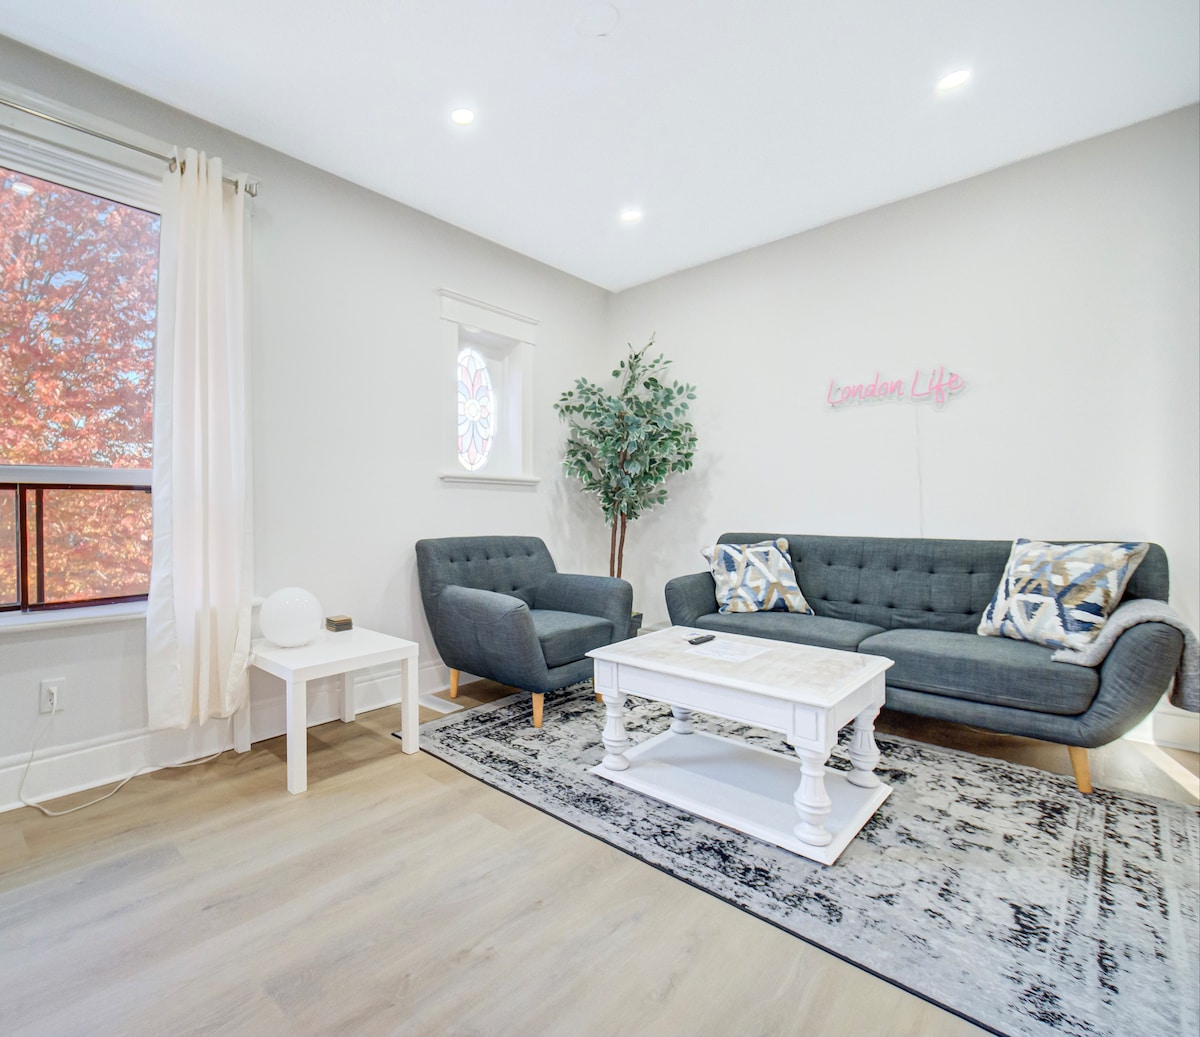 London Life : Cozy & Newly Renovated Oasis